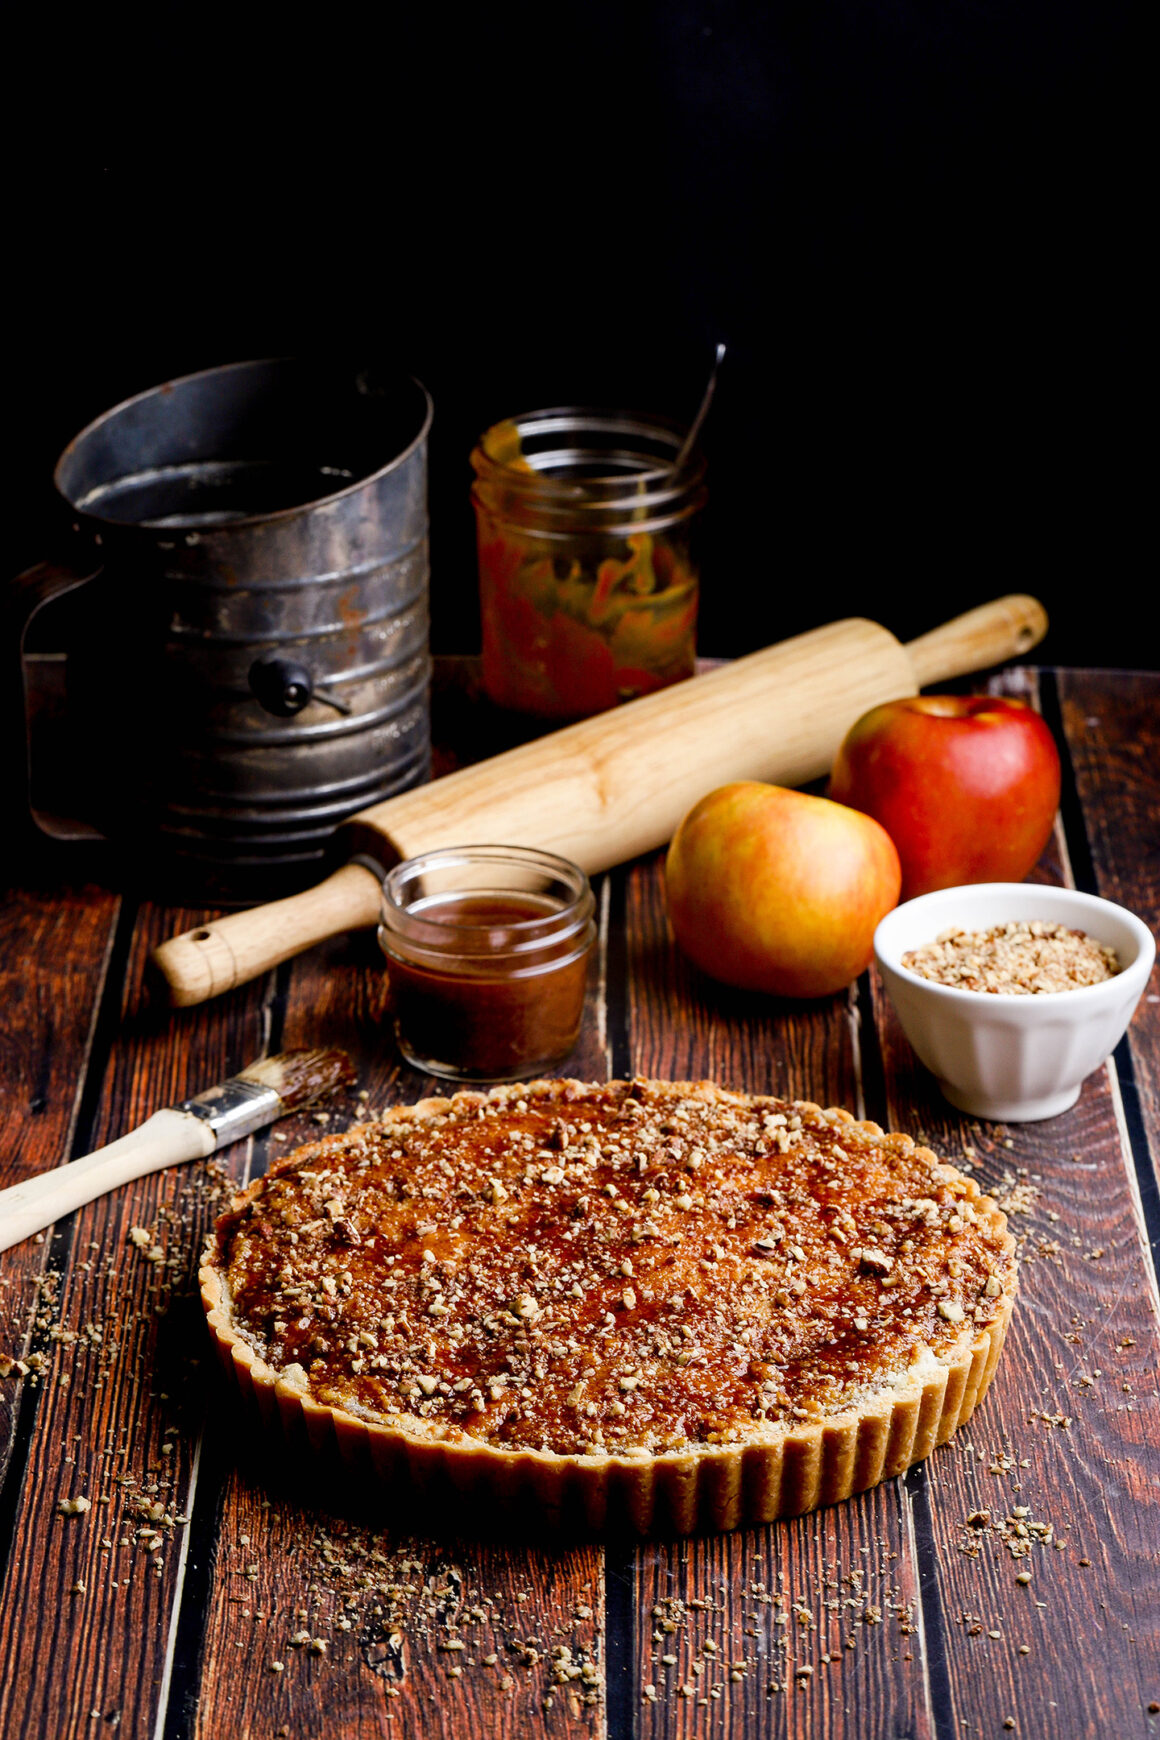 baked apple pecan tart with caramel and candied pecans